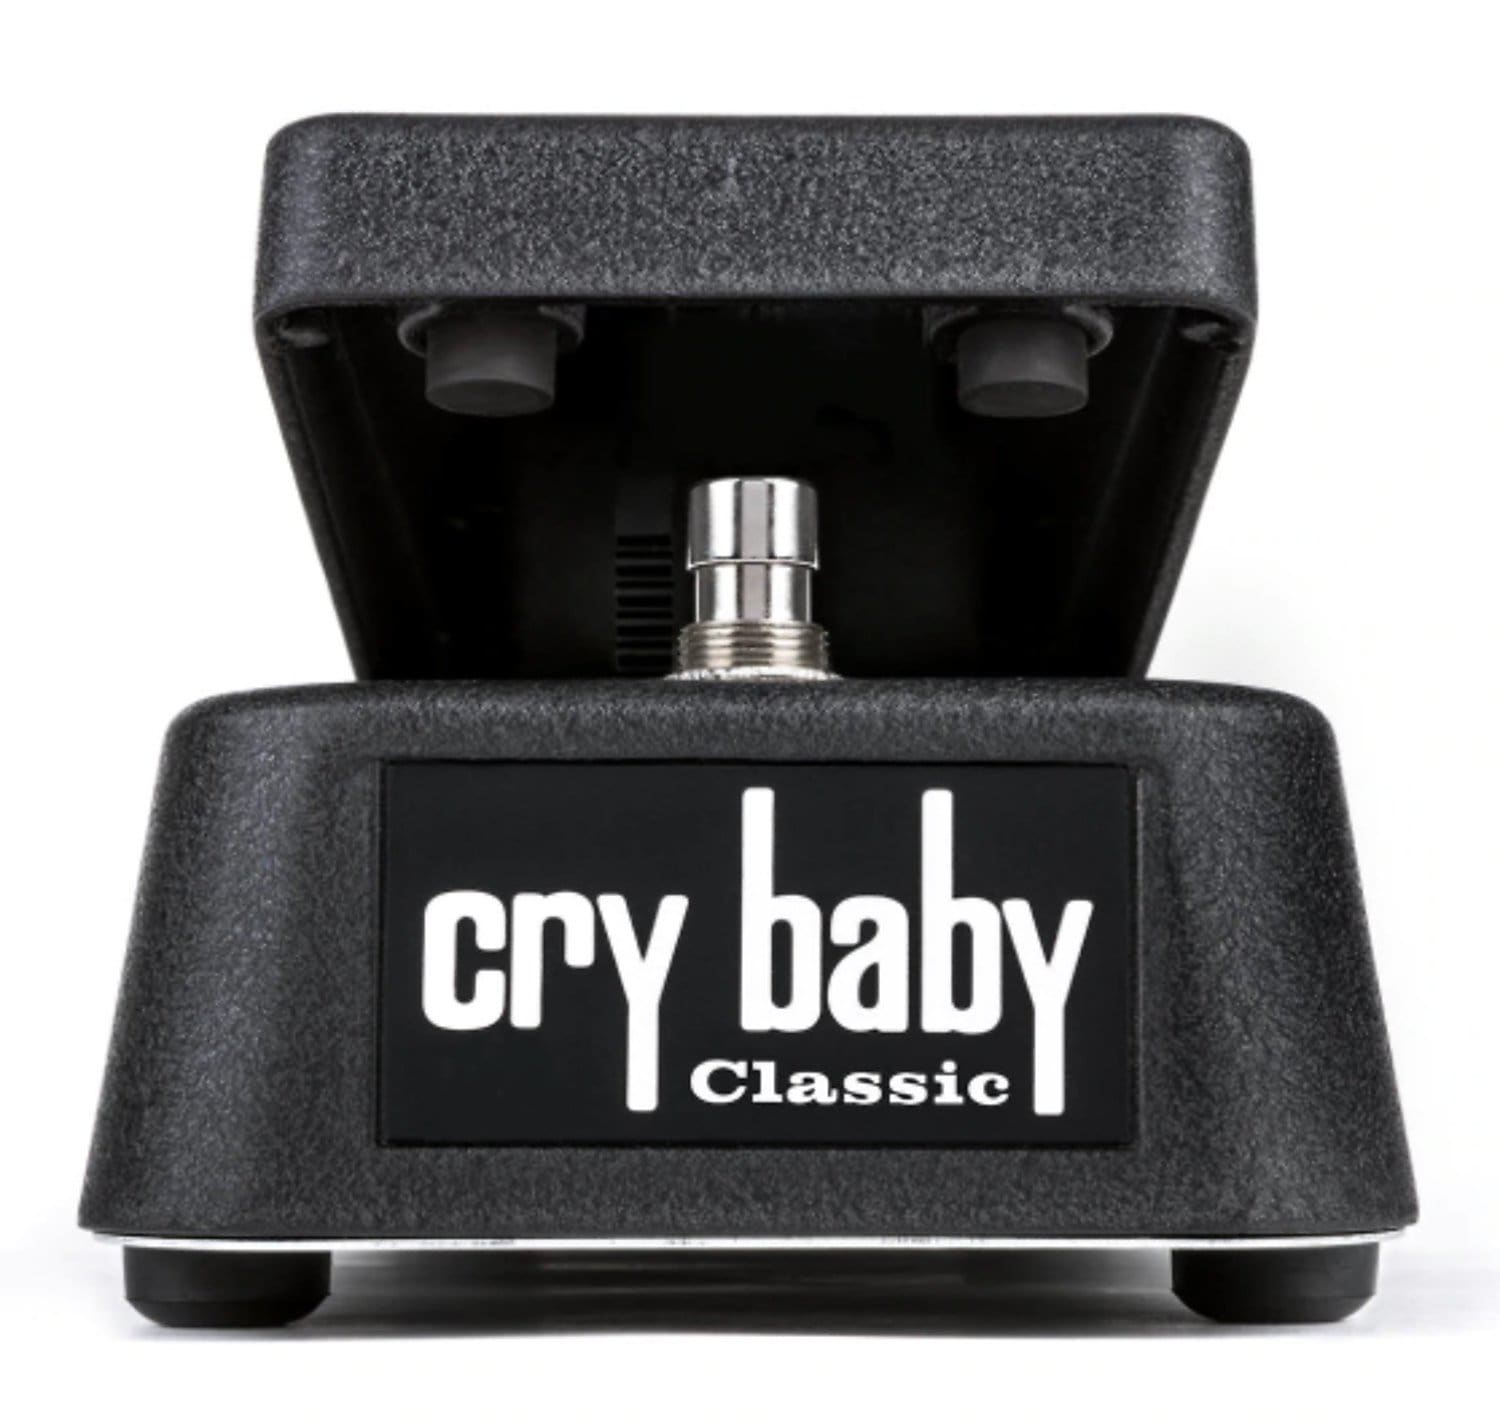 USED Dunlop Cry Baby Classic Wah